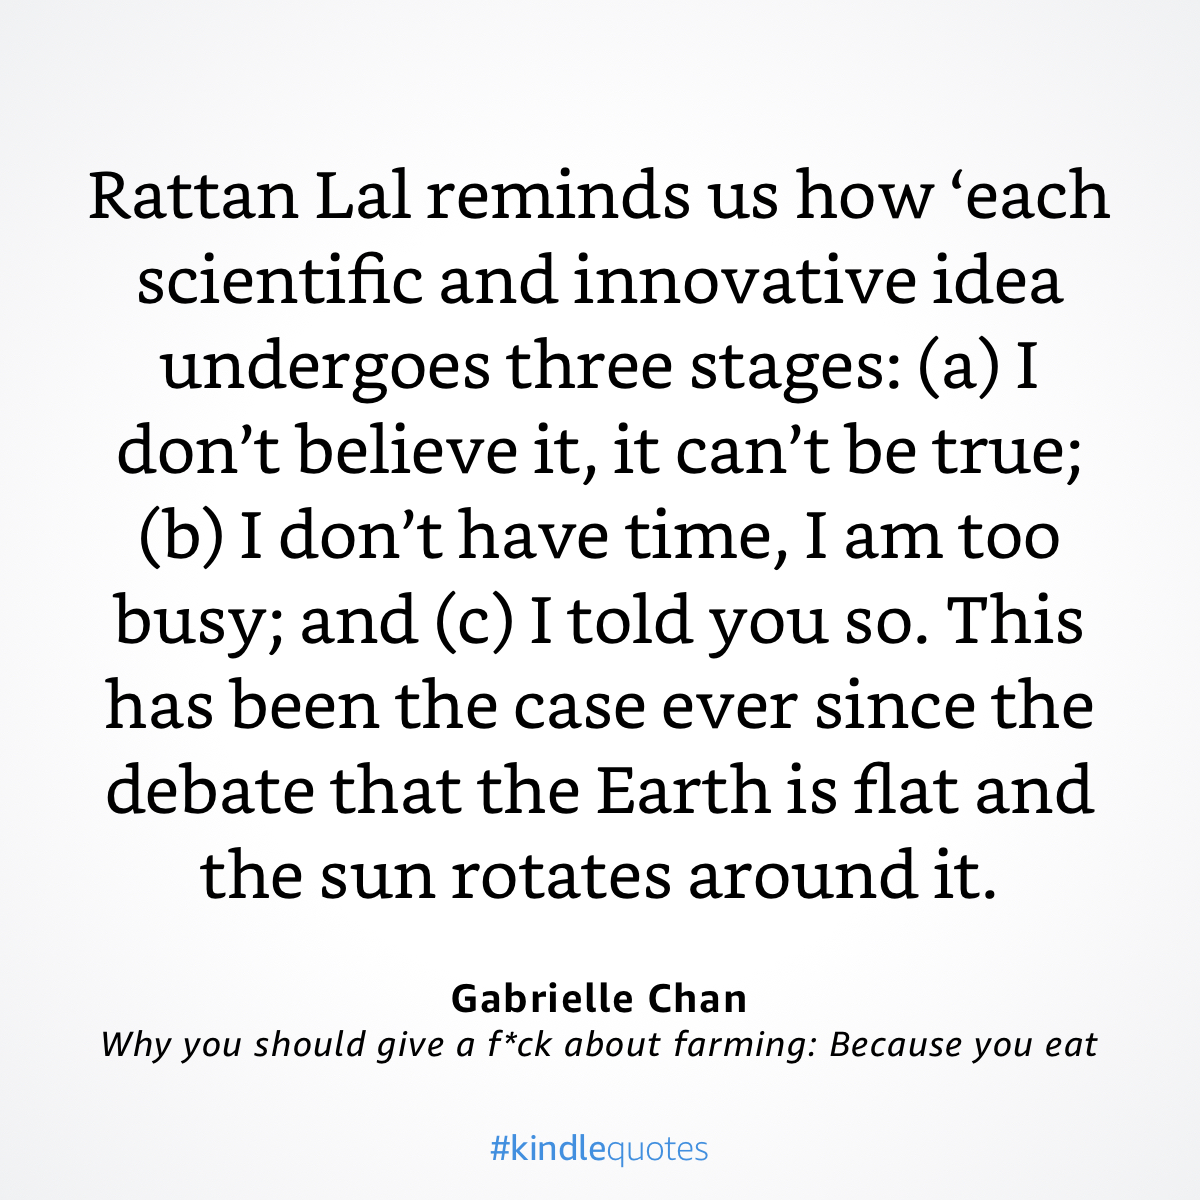 image quote from Ratten Lal on the three stages of a scientific idea